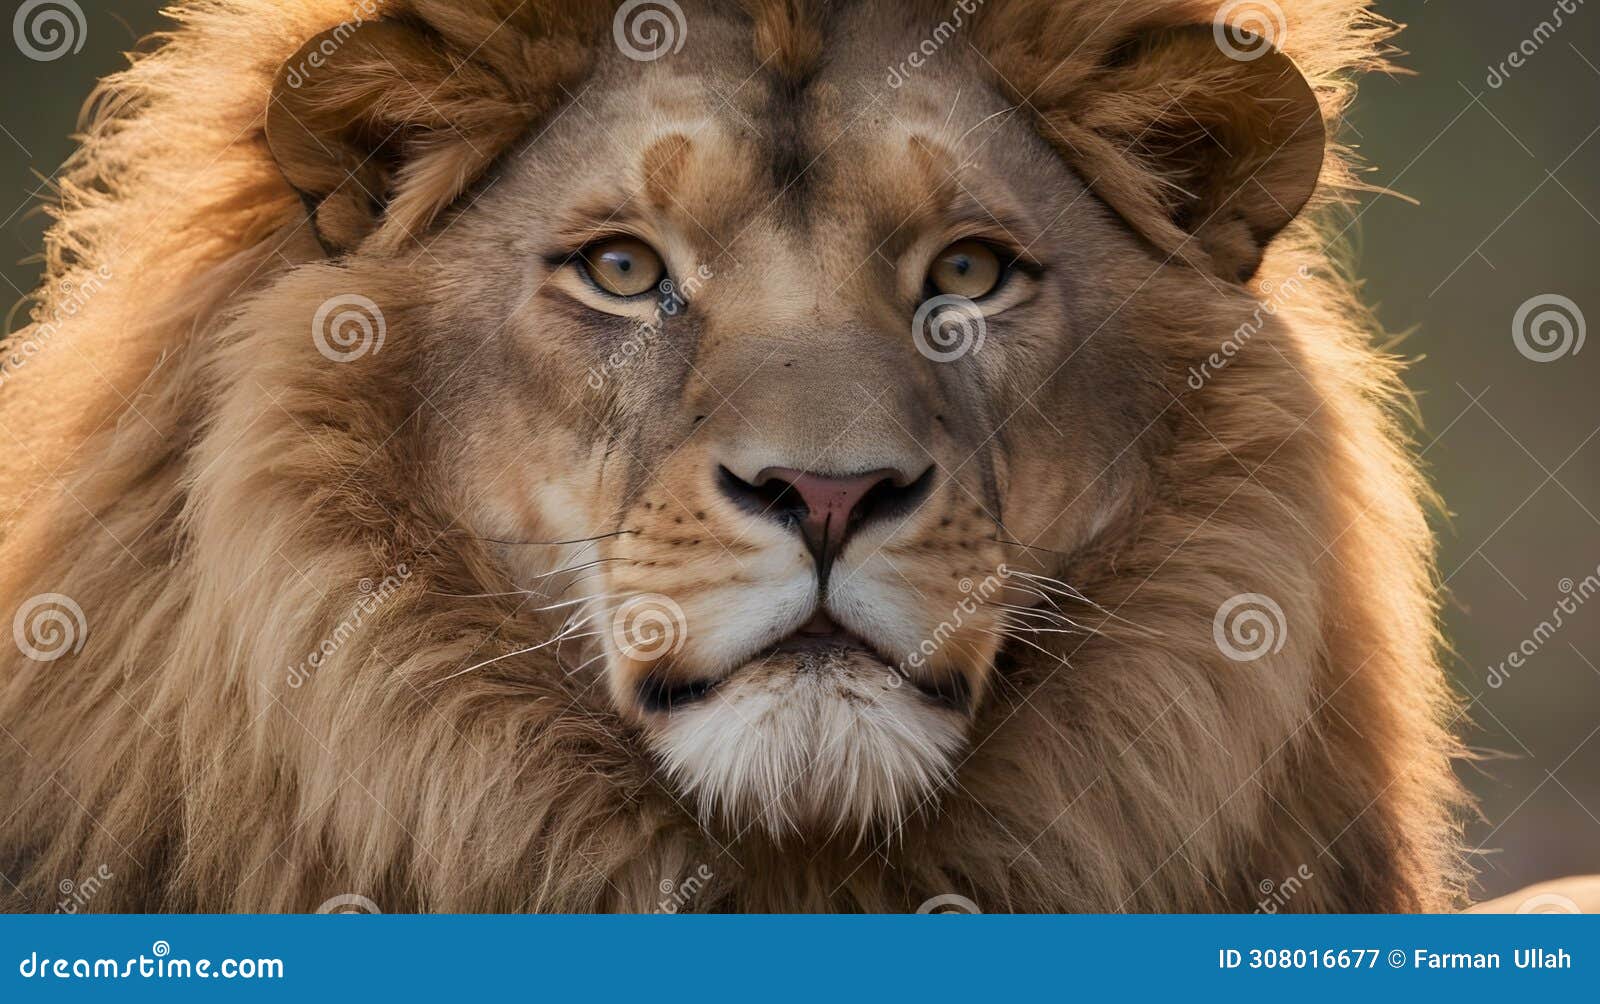 lion setting in solid ground